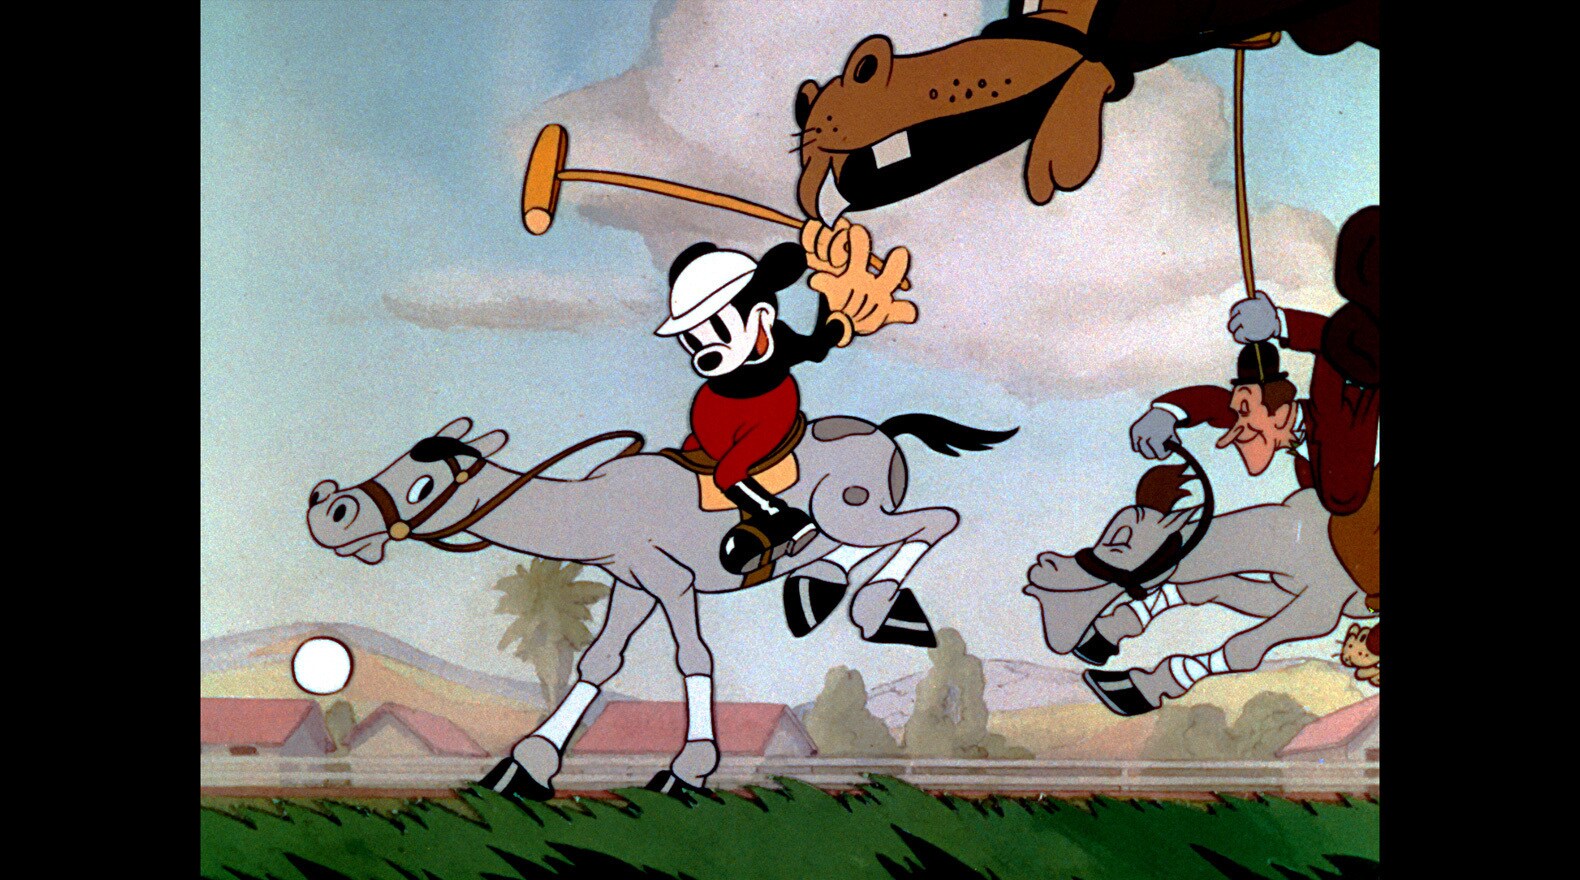 Mickey leads his friends in a game of polo.